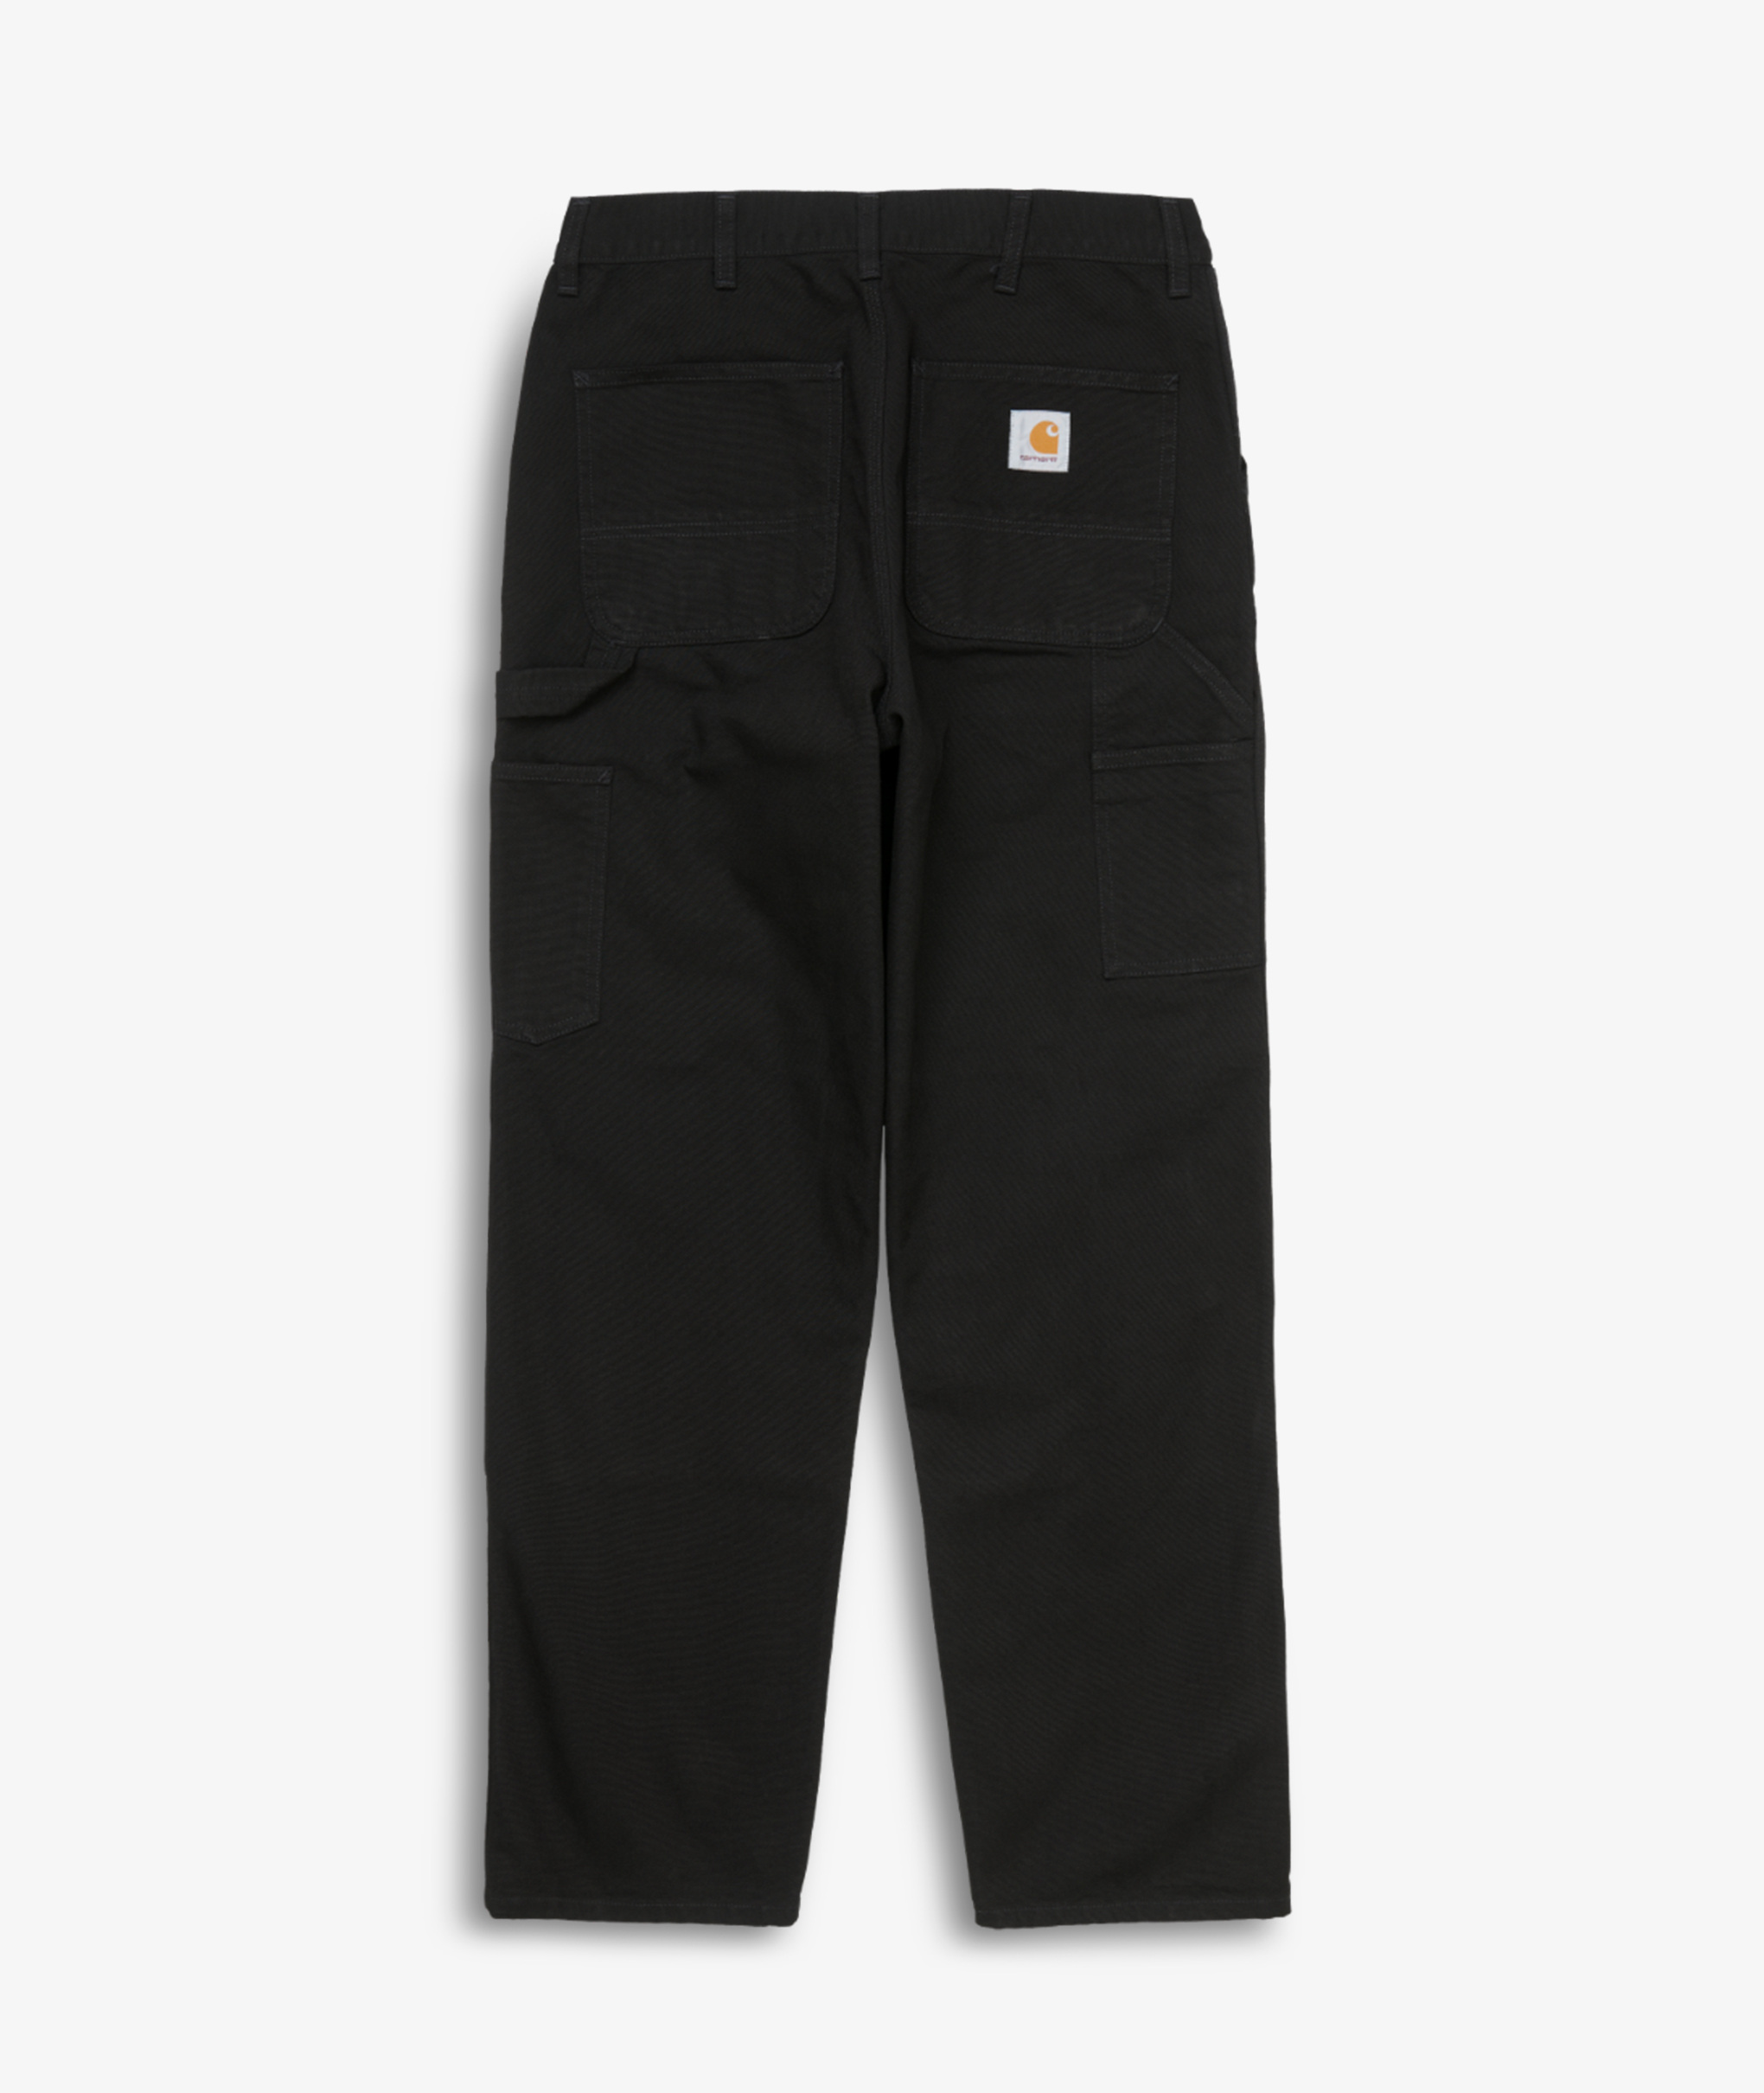 Norse Store  Shipping Worldwide - Carhartt WIP Double Knee Pant - Black  Rinsed